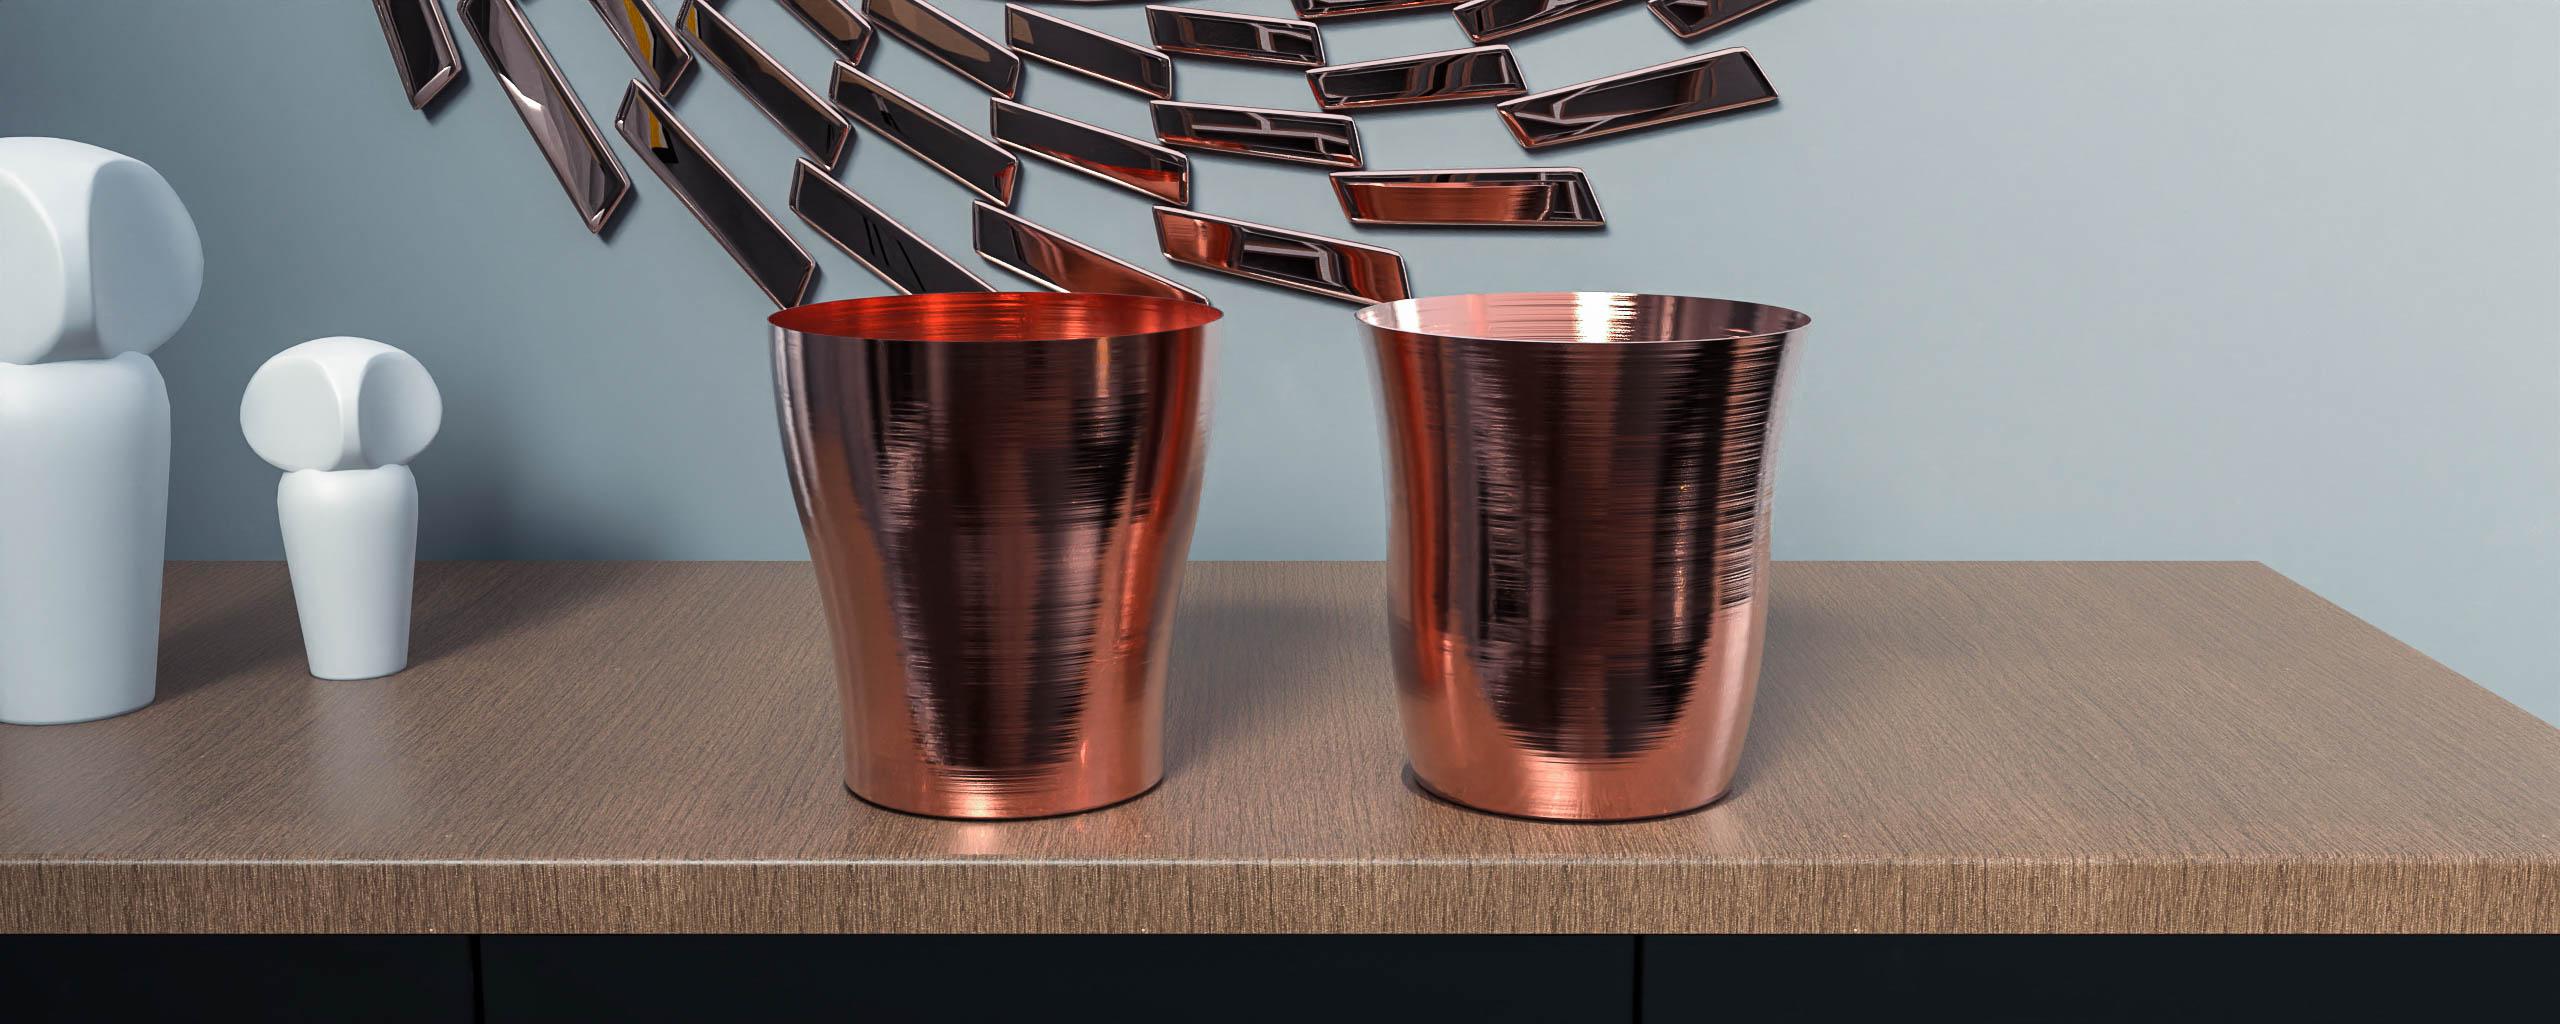 Champagne buckets designed and manufactured in French region 